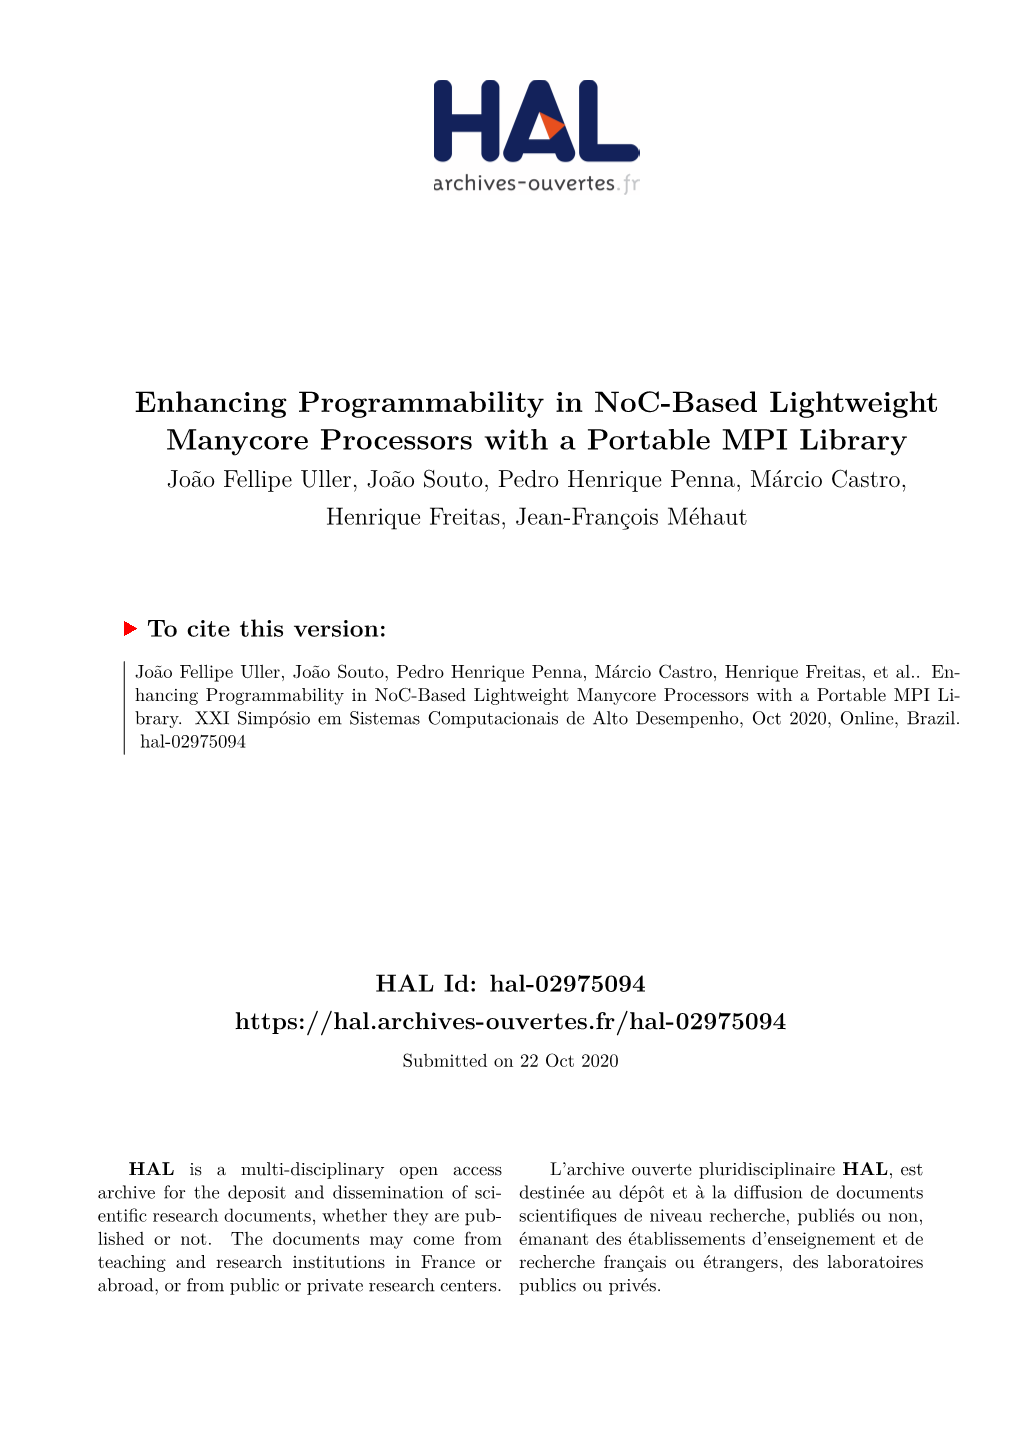 Enhancing Programmability in Noc-Based Lightweight Manycore Processors with a Portable MPI Library